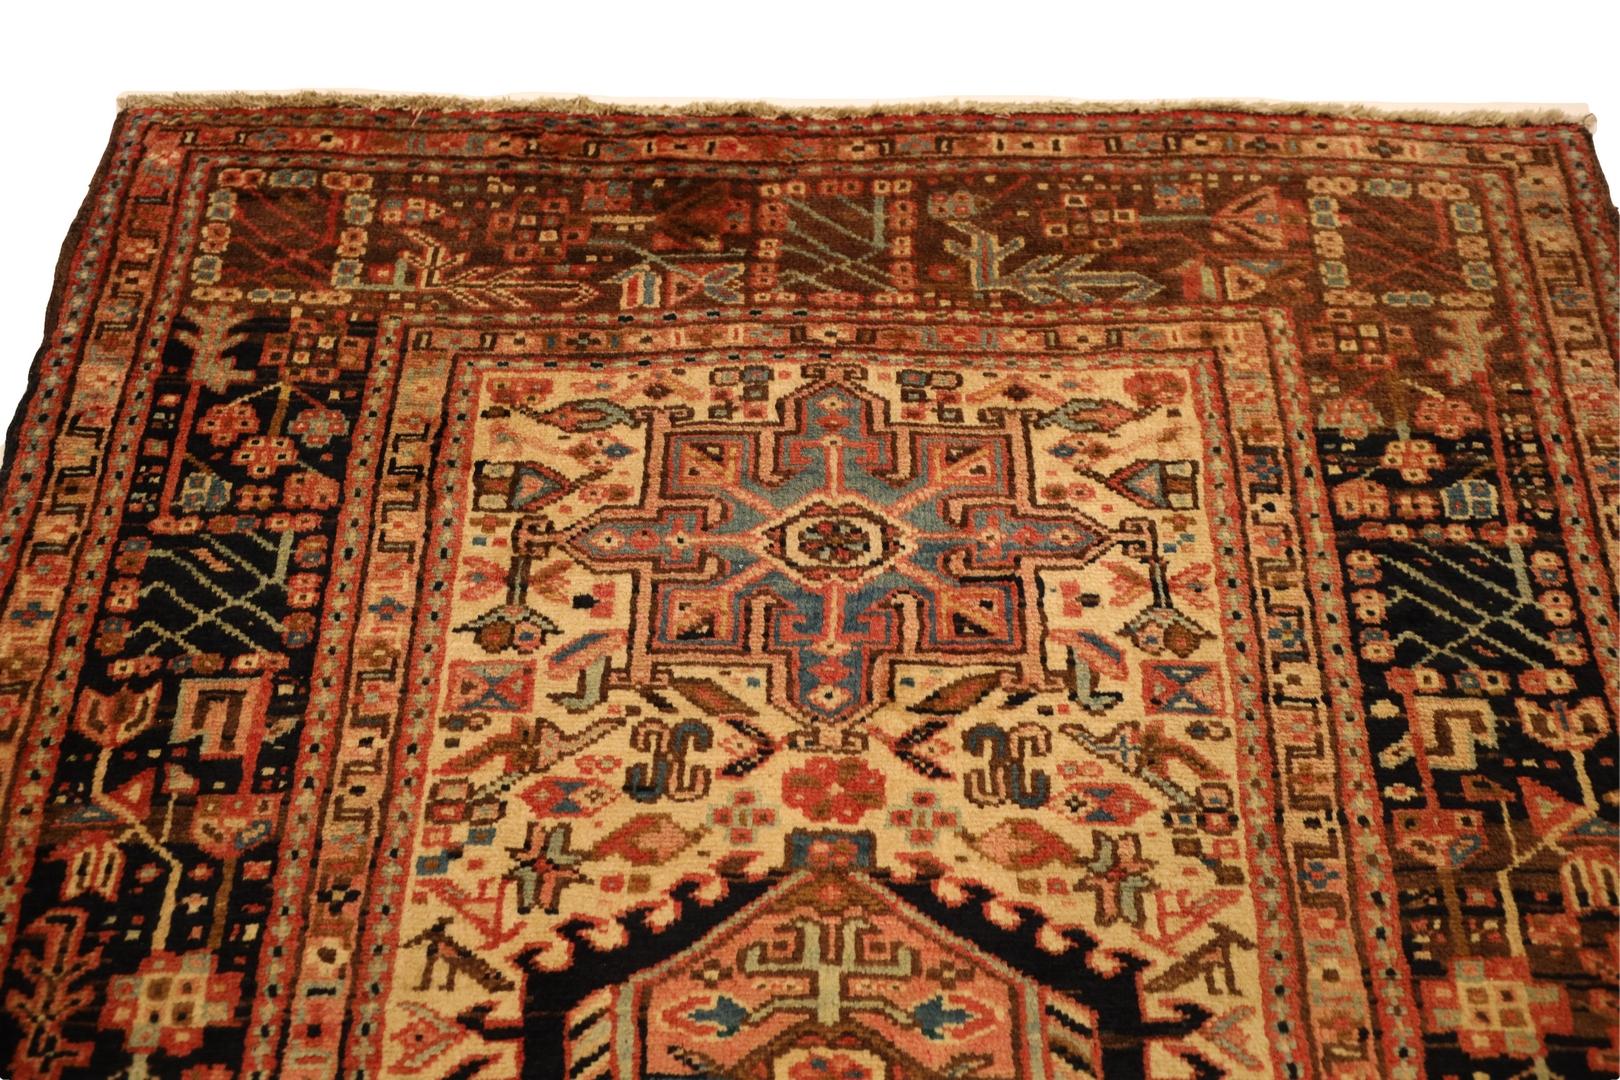 Hand-Knotted Karejeh Semi-Antique Rug - 3'8